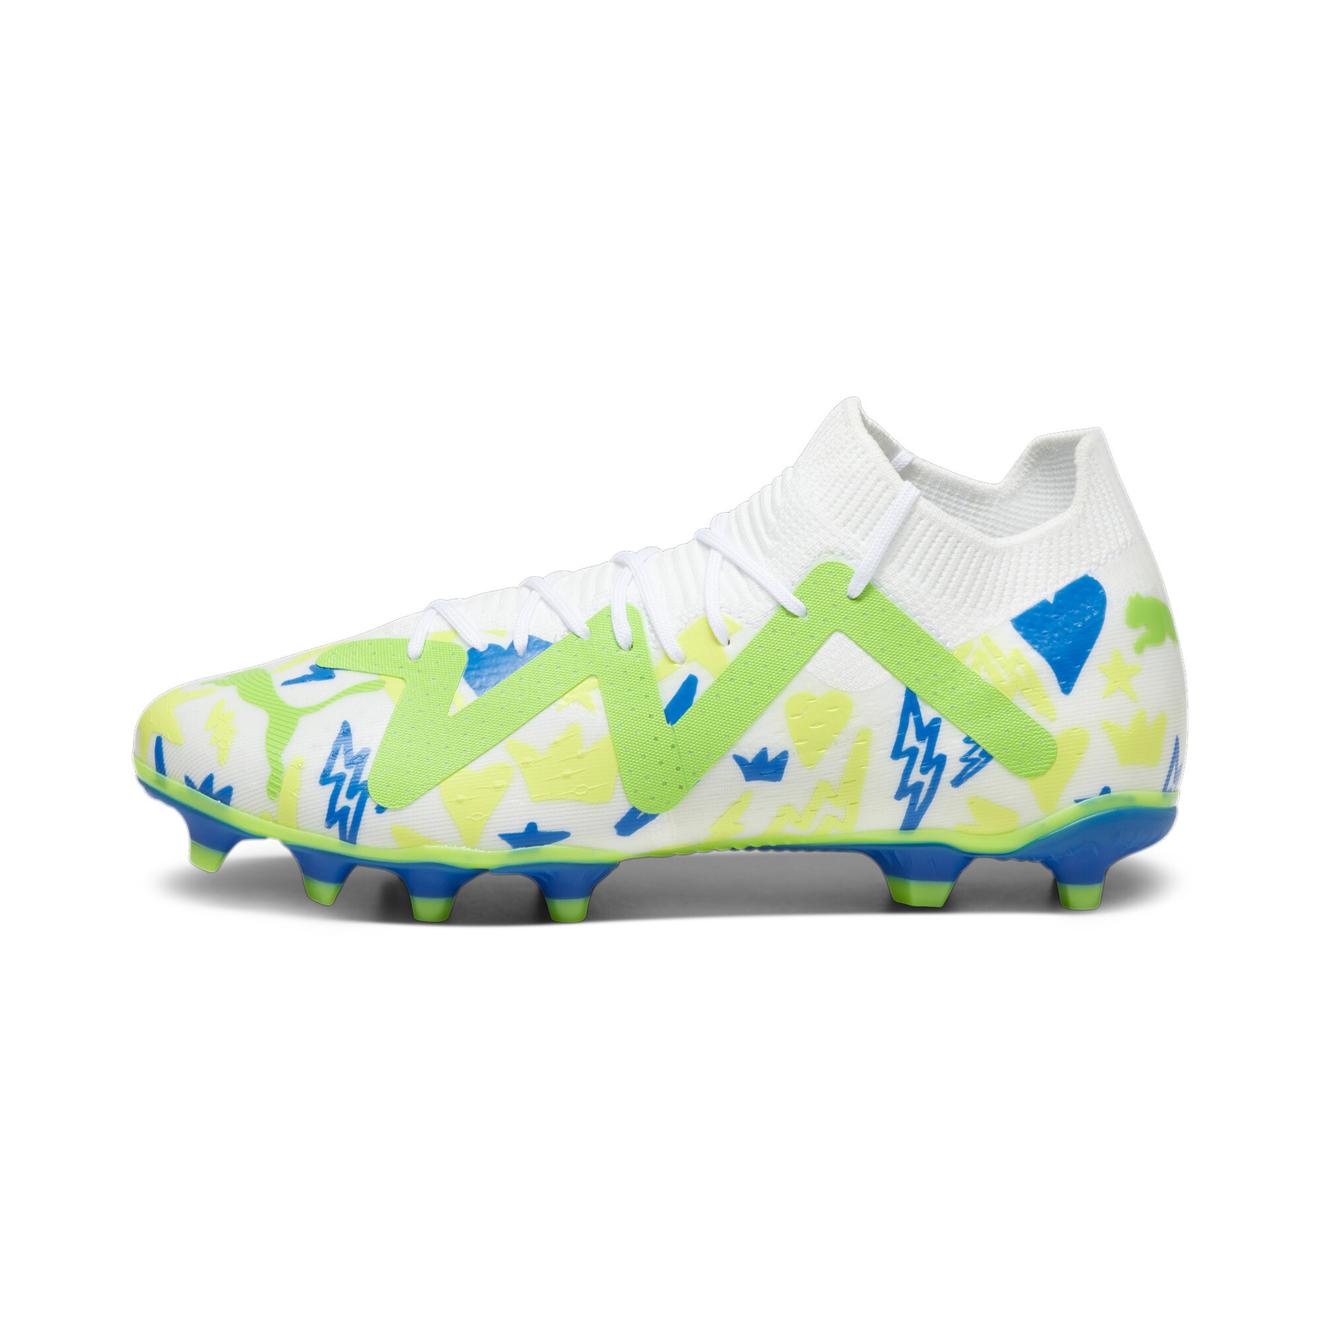 FUTURE MATCH Neymar Jr FG/AG Football Boots offers at 309 Dhs in Puma